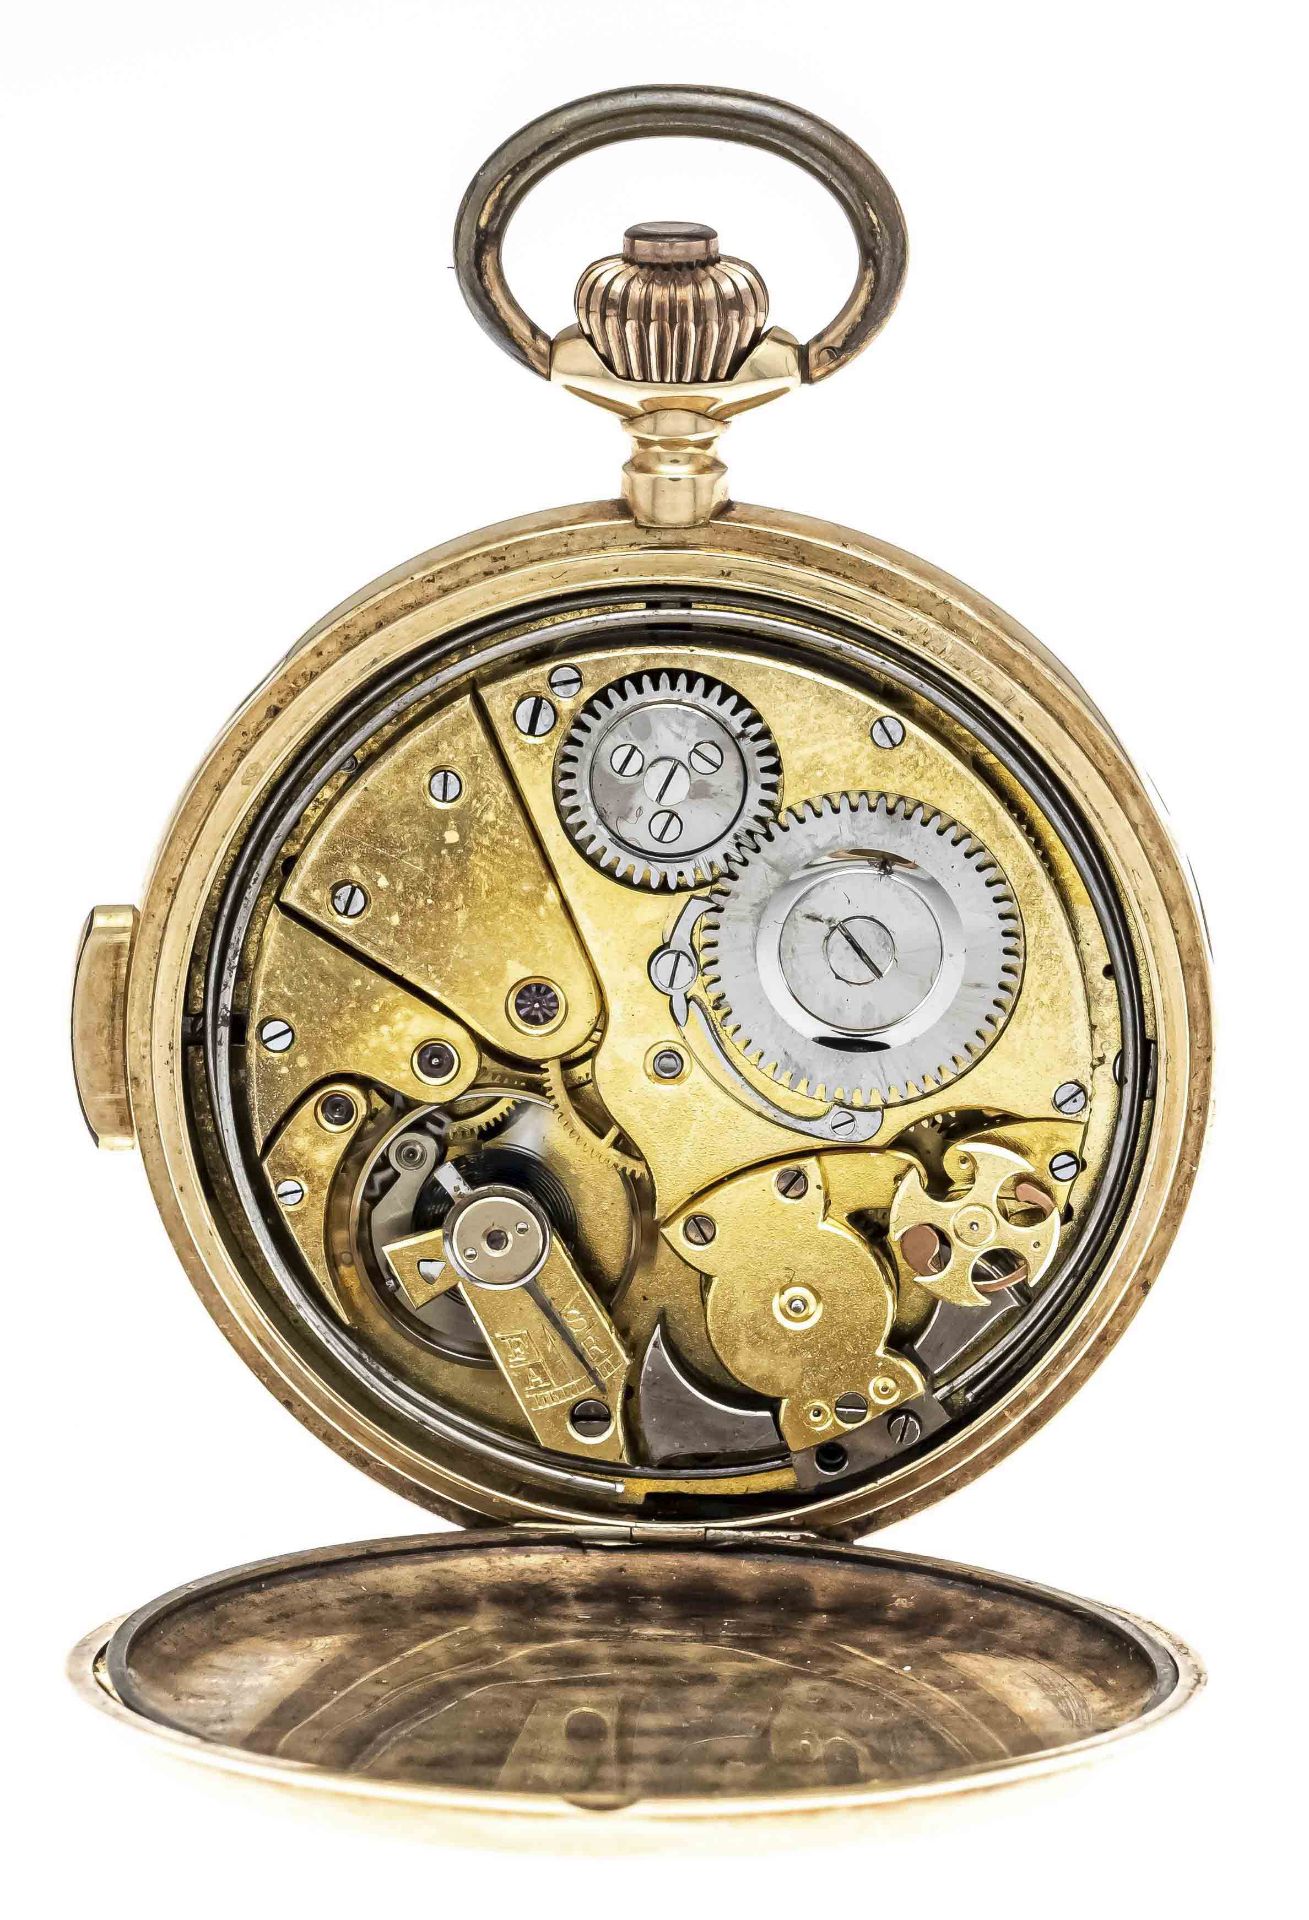 1/4 hour repeater pocket watch, chronometer, sprung cover, 585/000 GG, 2 gold covers, guilloché - Image 2 of 3